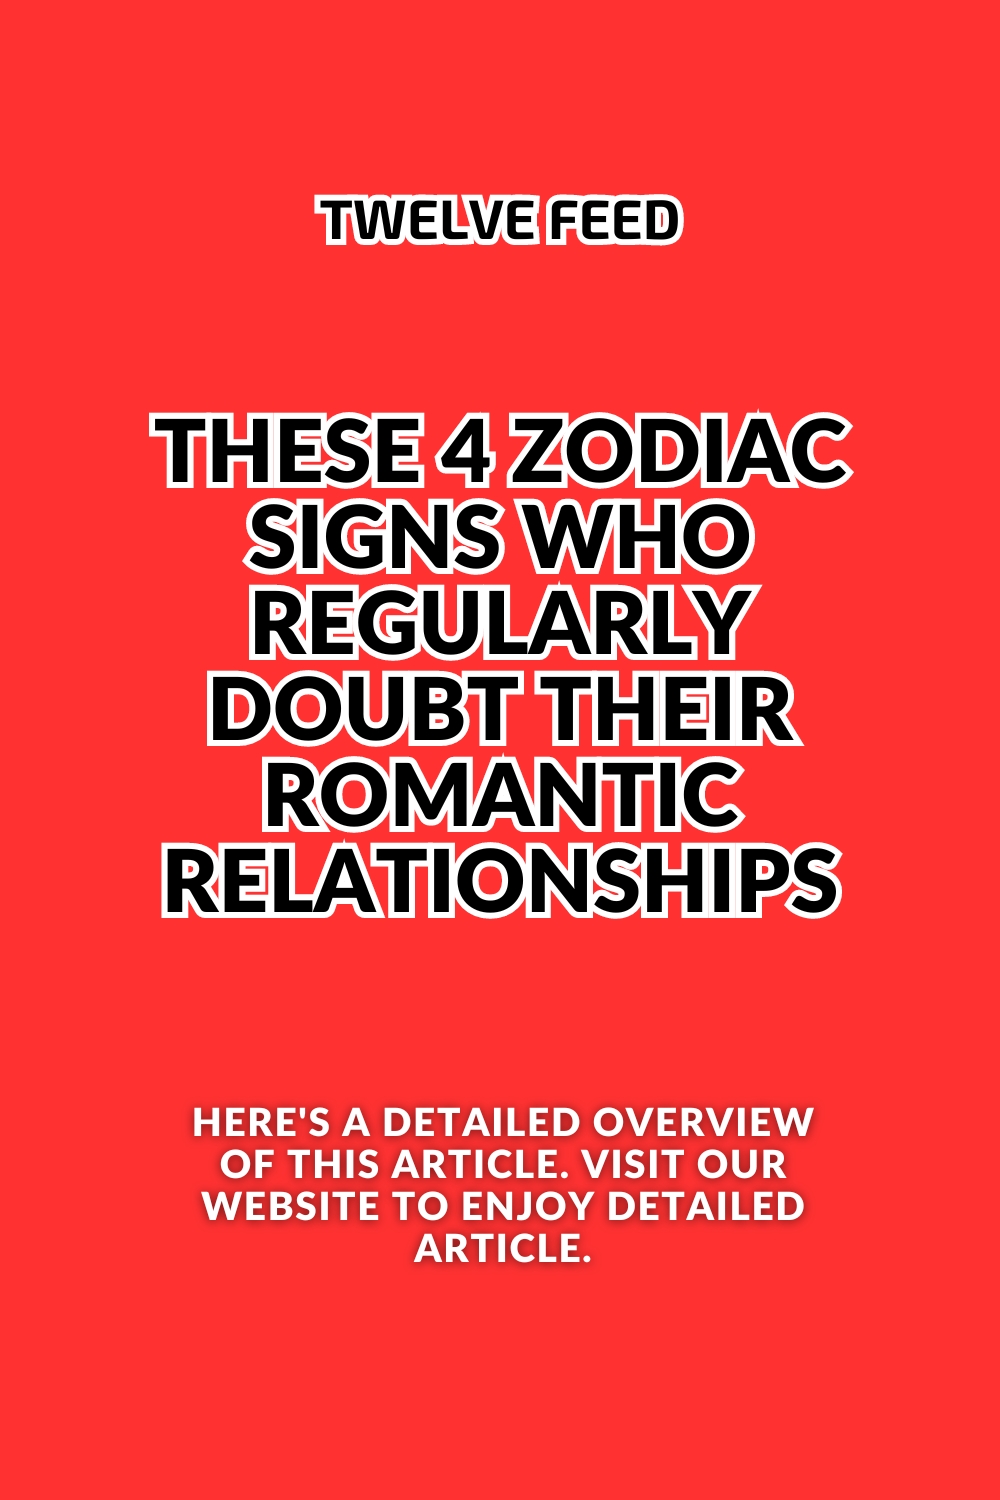 4 Zodiac Signs Who Regularly Doubt Their Romantic Relationships